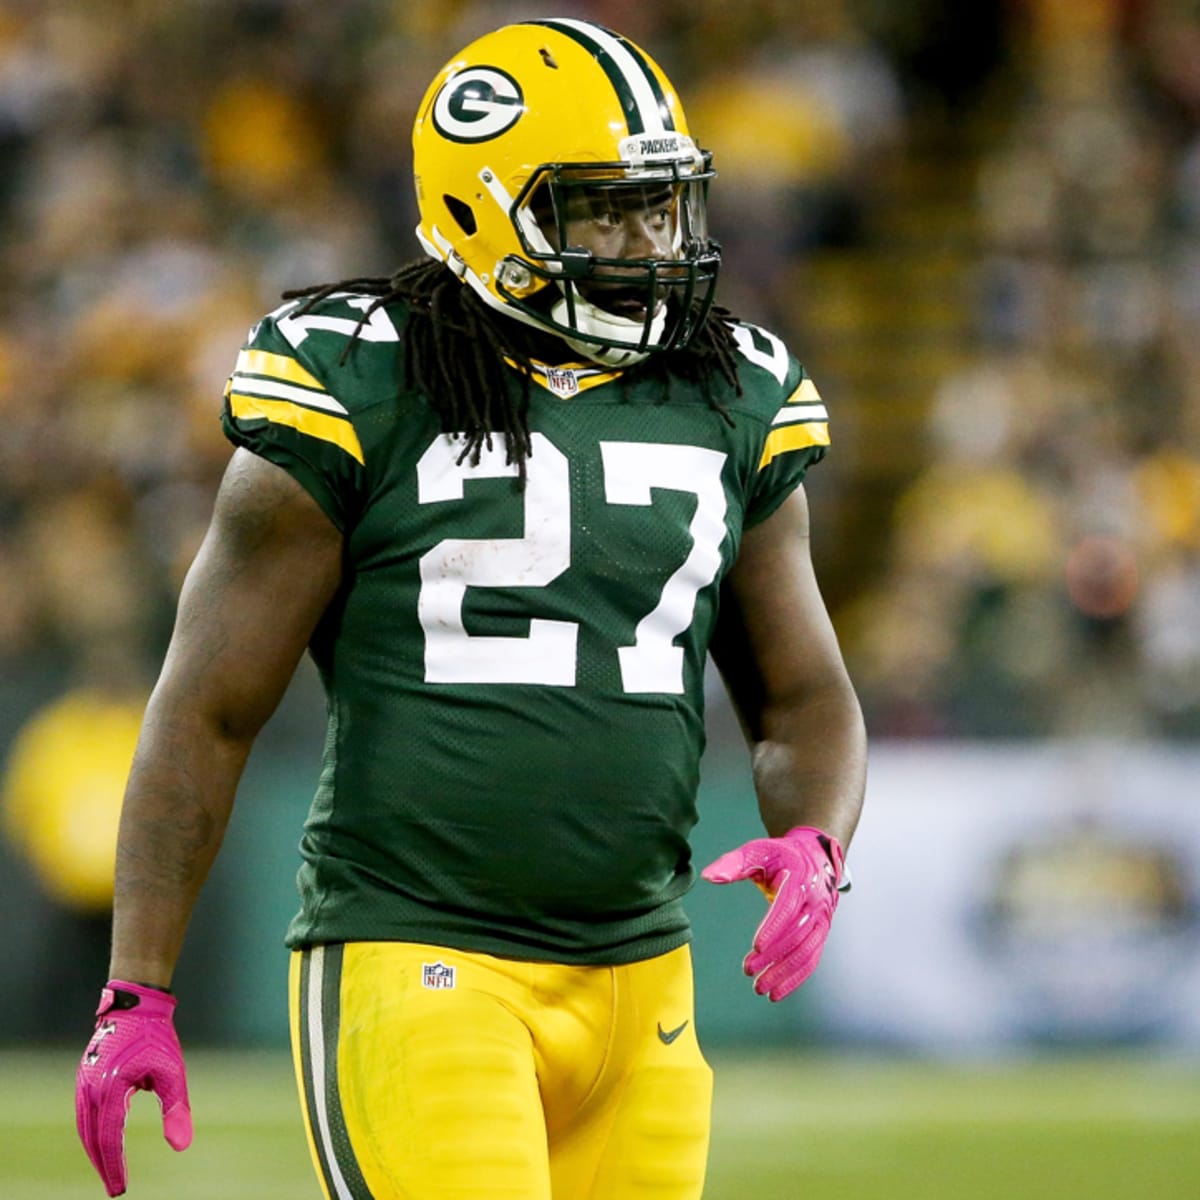 Eddie Lacy gets $55,000 for weighing less than 250 pounds - Sports ...